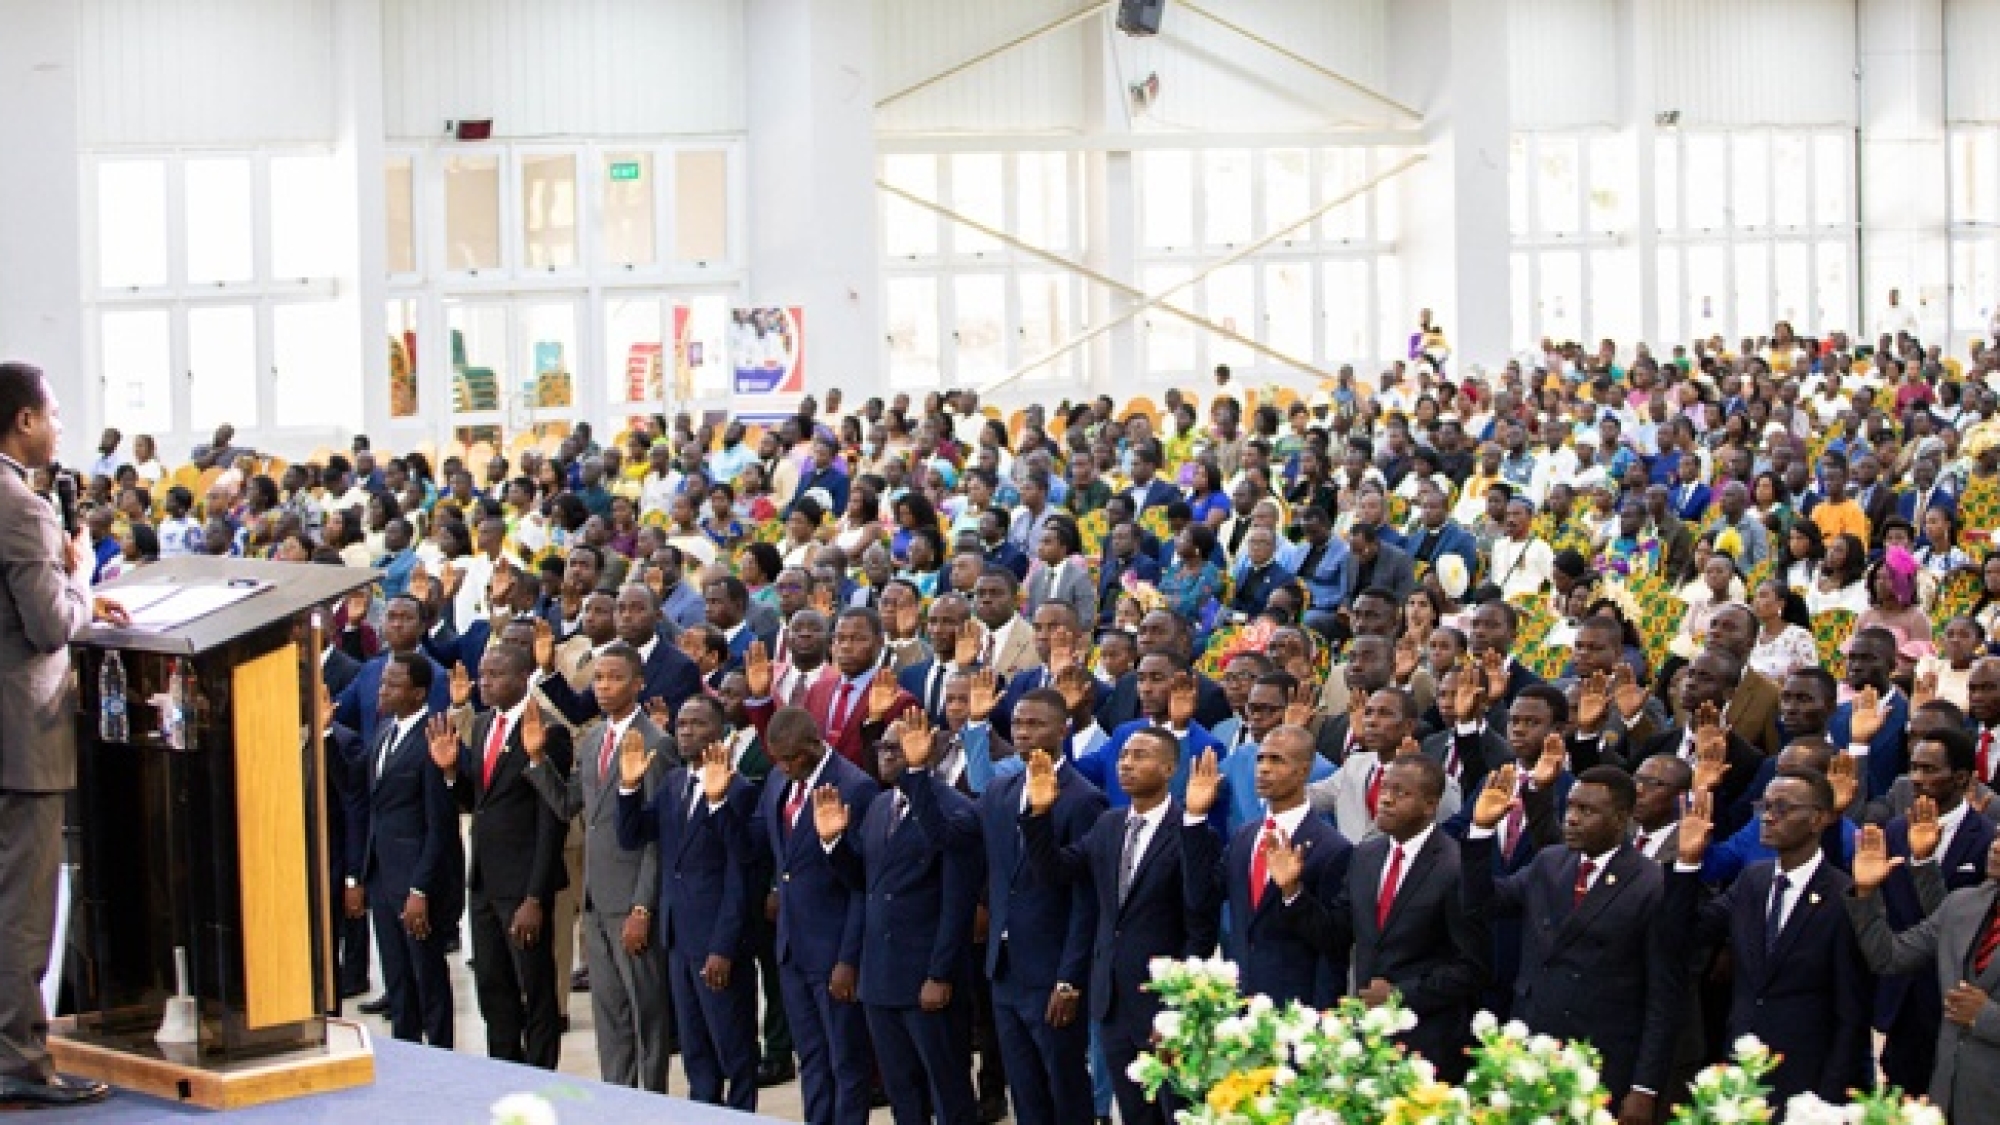 129 Ministerial Students Commissioned Into Full-Time Ministry web